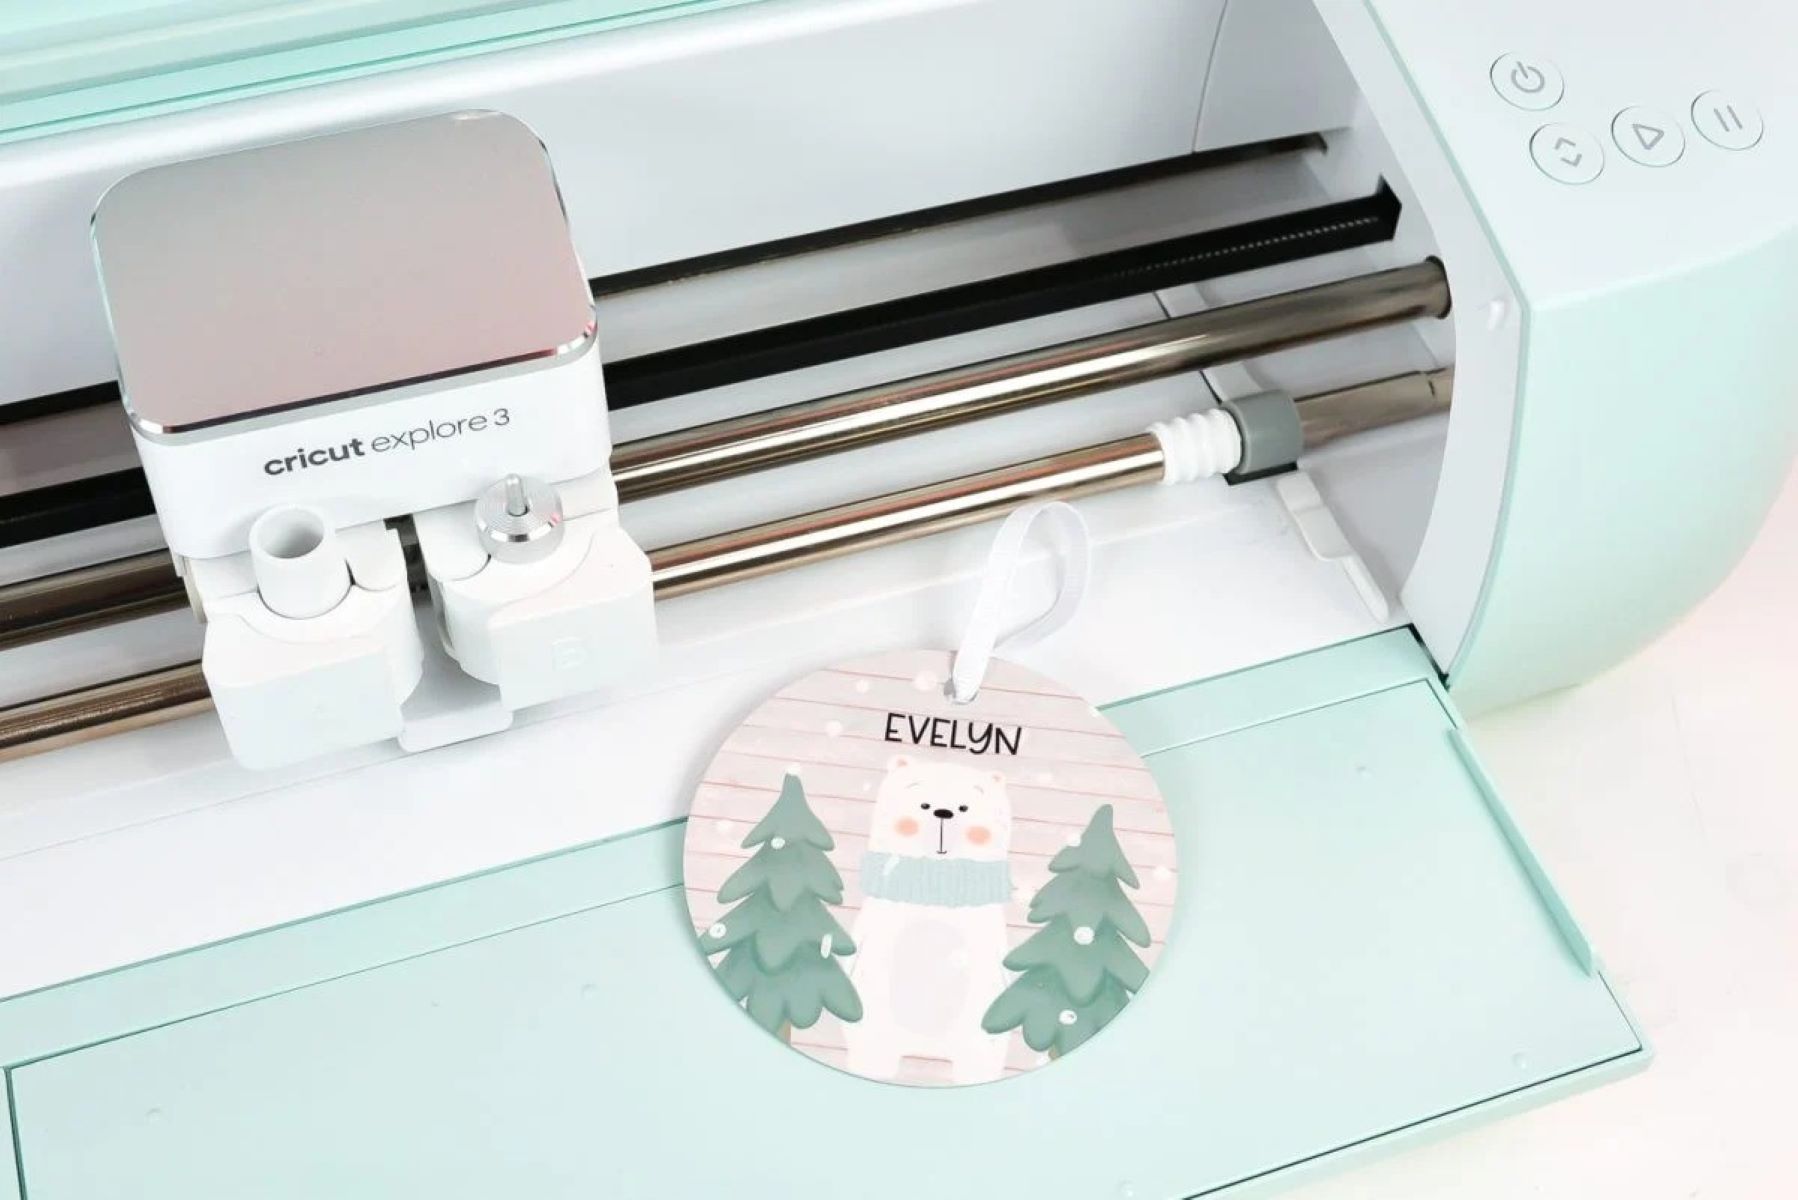 How To Connect A Printer To Cricut Design Space